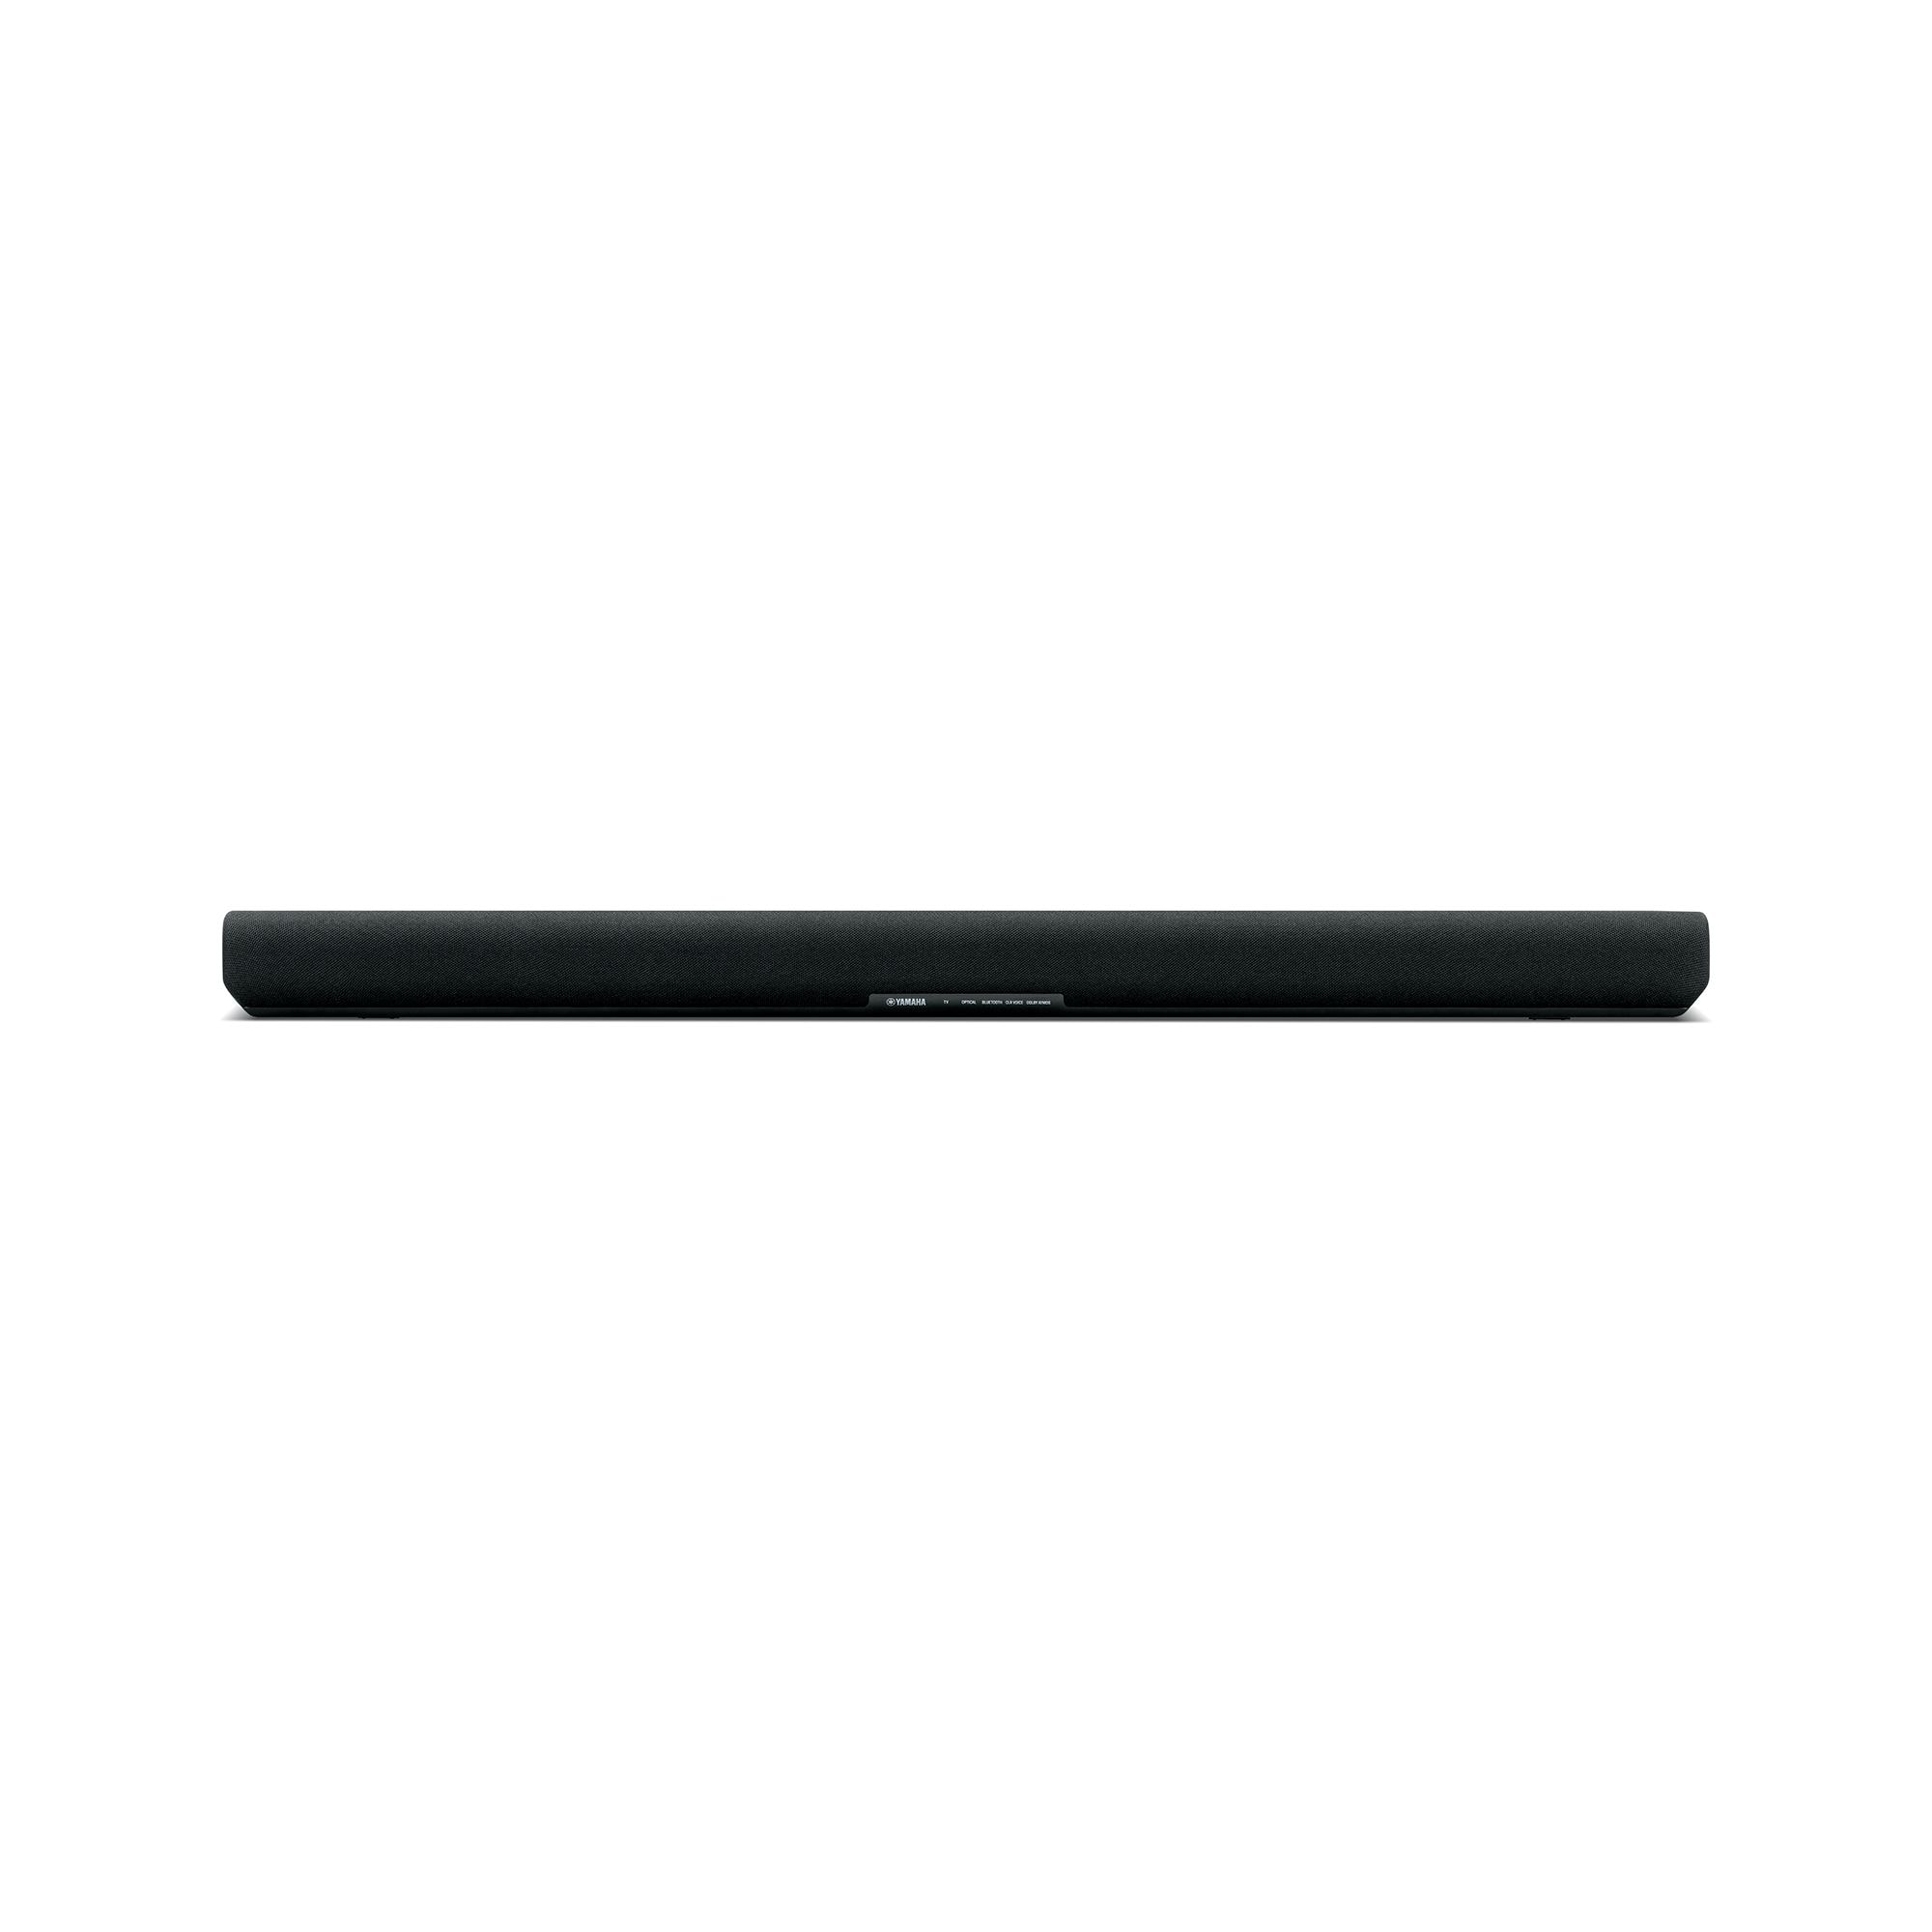 SR-B30A - Overview - Sound Bar - Audio & Visual - Products